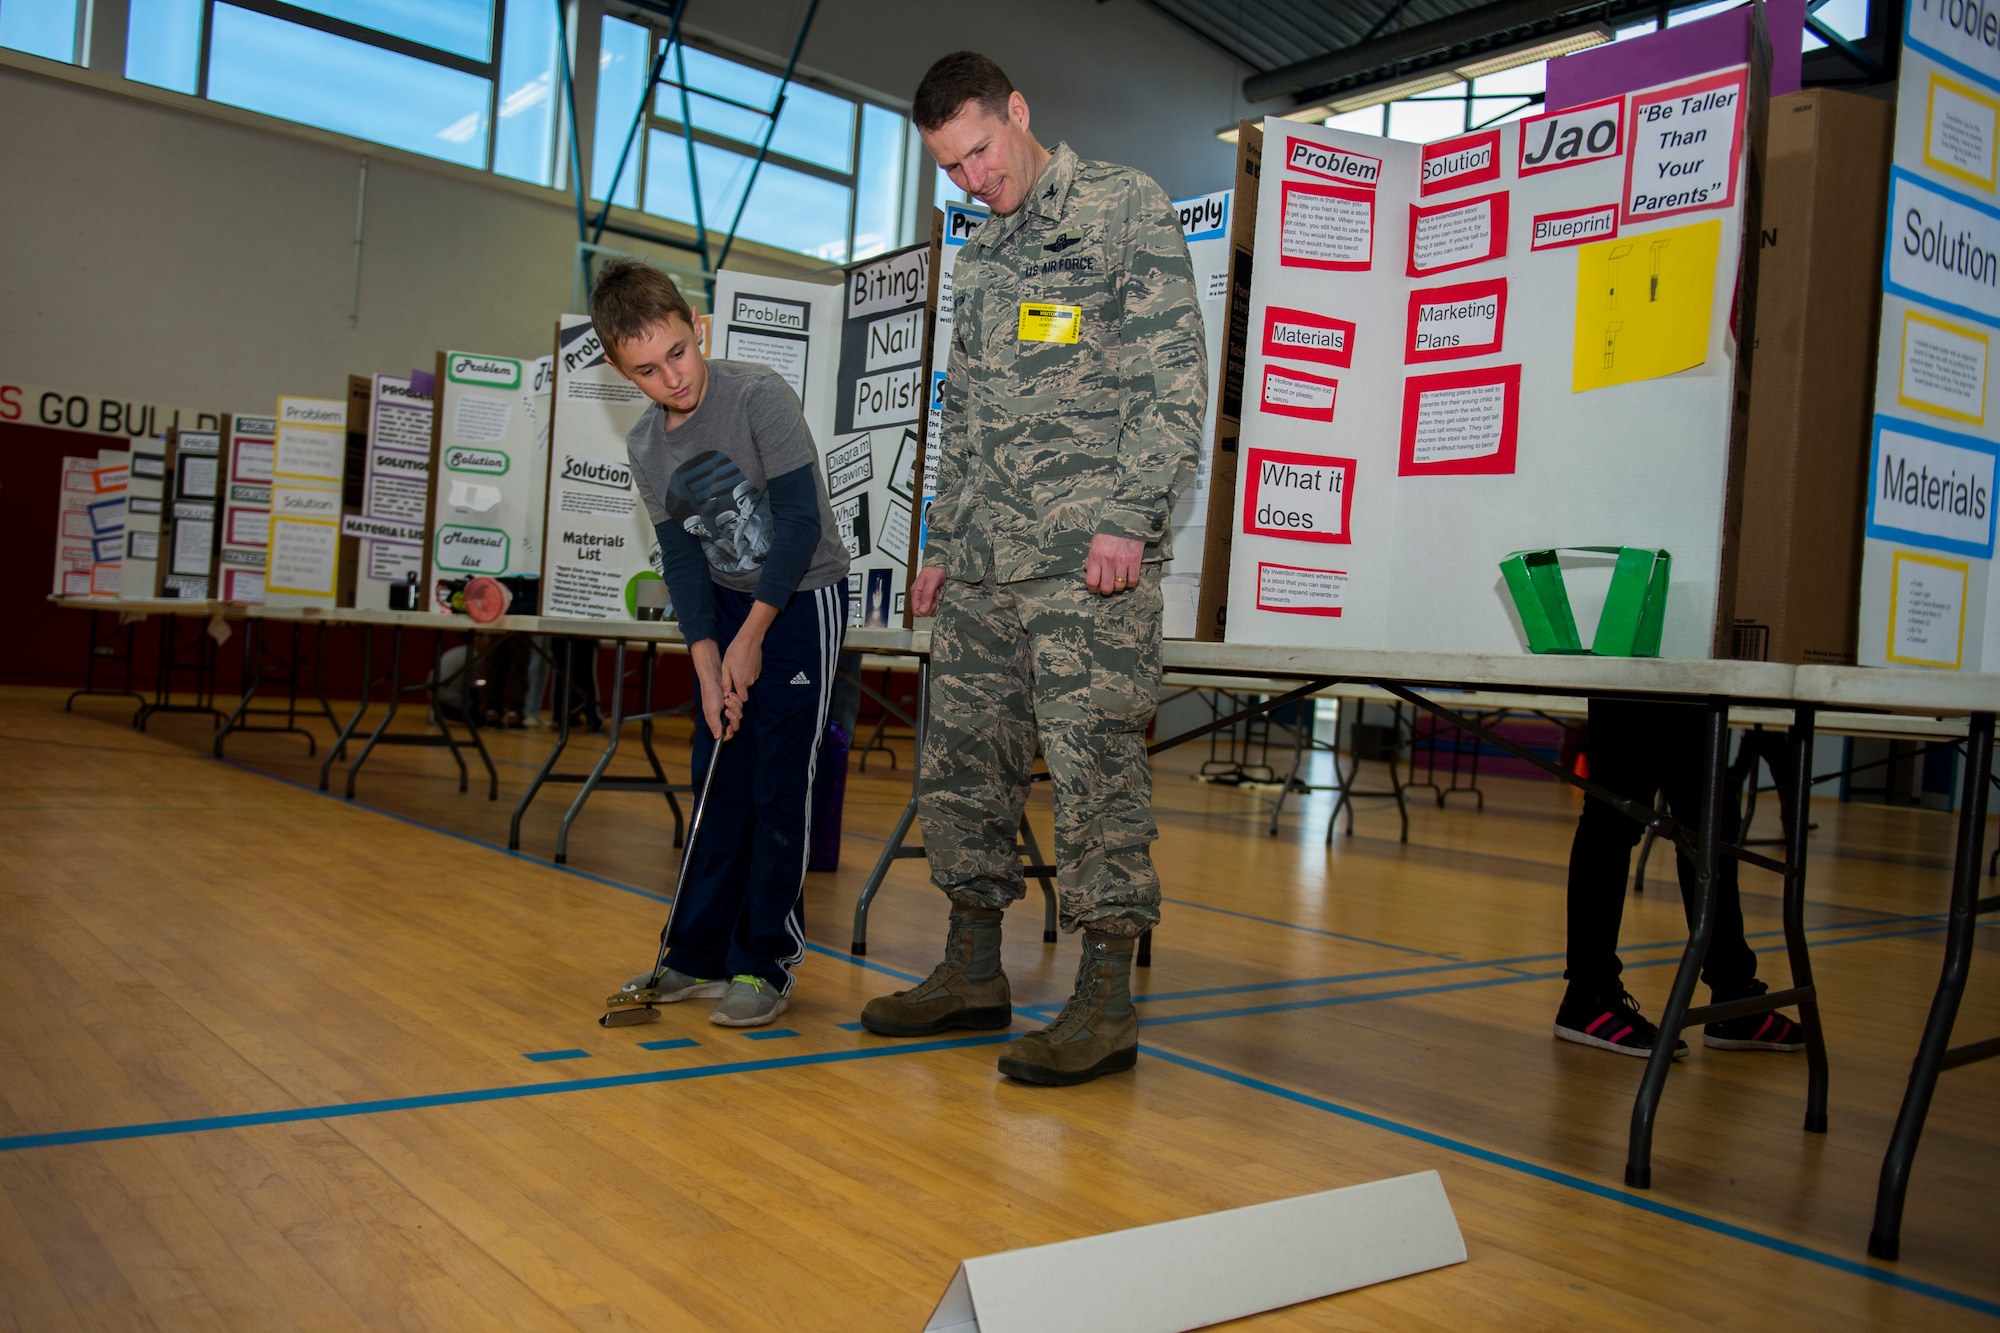 A student shows his invention of a “laser putter” to U.S. Air Force Col. Steve Horton, 52nd Fighter Wing vice commander, during the Invention Convention at Spangdahlem Middle High School at Spangdahlem Air Base, Germany, Dec. 15, 2015. The students explained and demonstrated their inventions to Horton and a board of judges. (U.S. Air Force photo by Airman 1st Class Luke Kitterman/Released)